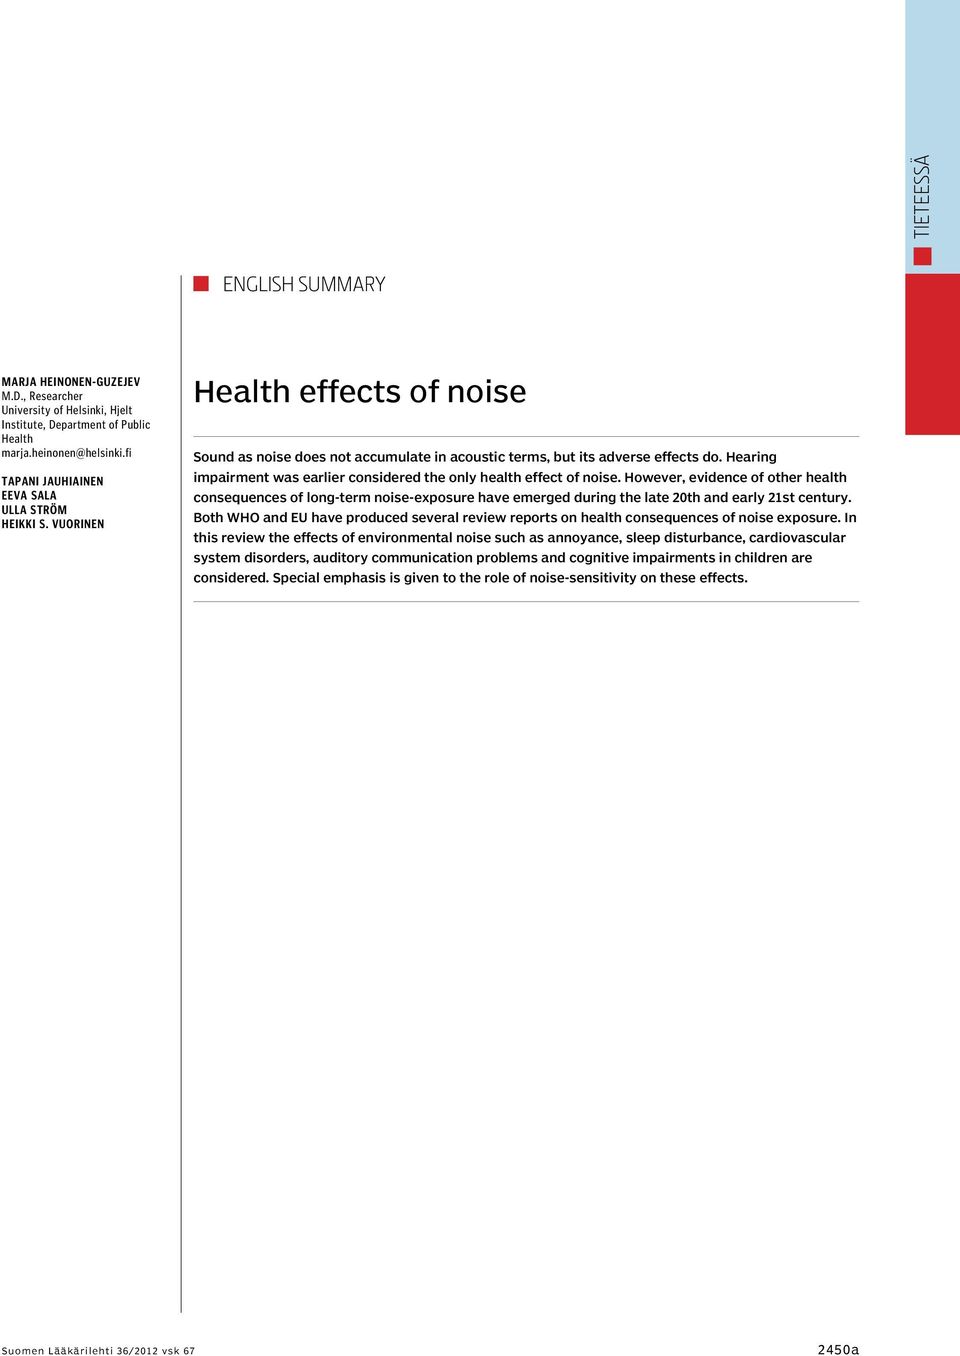 Hearing impairment was earlier considered the only health effect of noise.